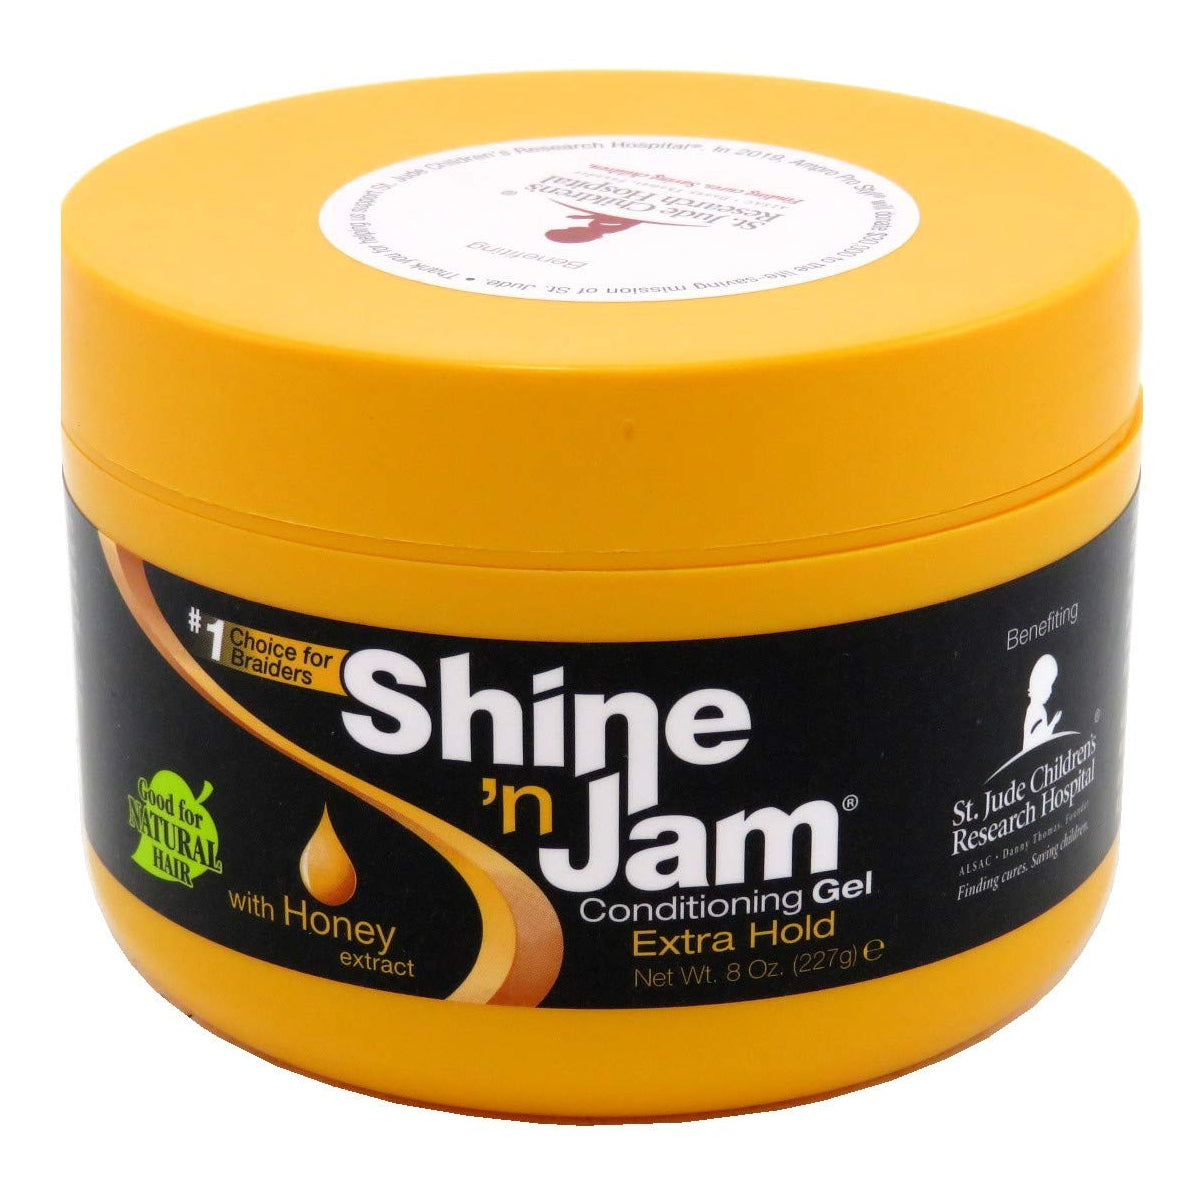  Slay It Pro Braid Jam Frizz-Free Shine Long Lasting Hold and  No Flaking for Braids, Locs and Twists 8 Oz (Super Hold) : Beauty &  Personal Care